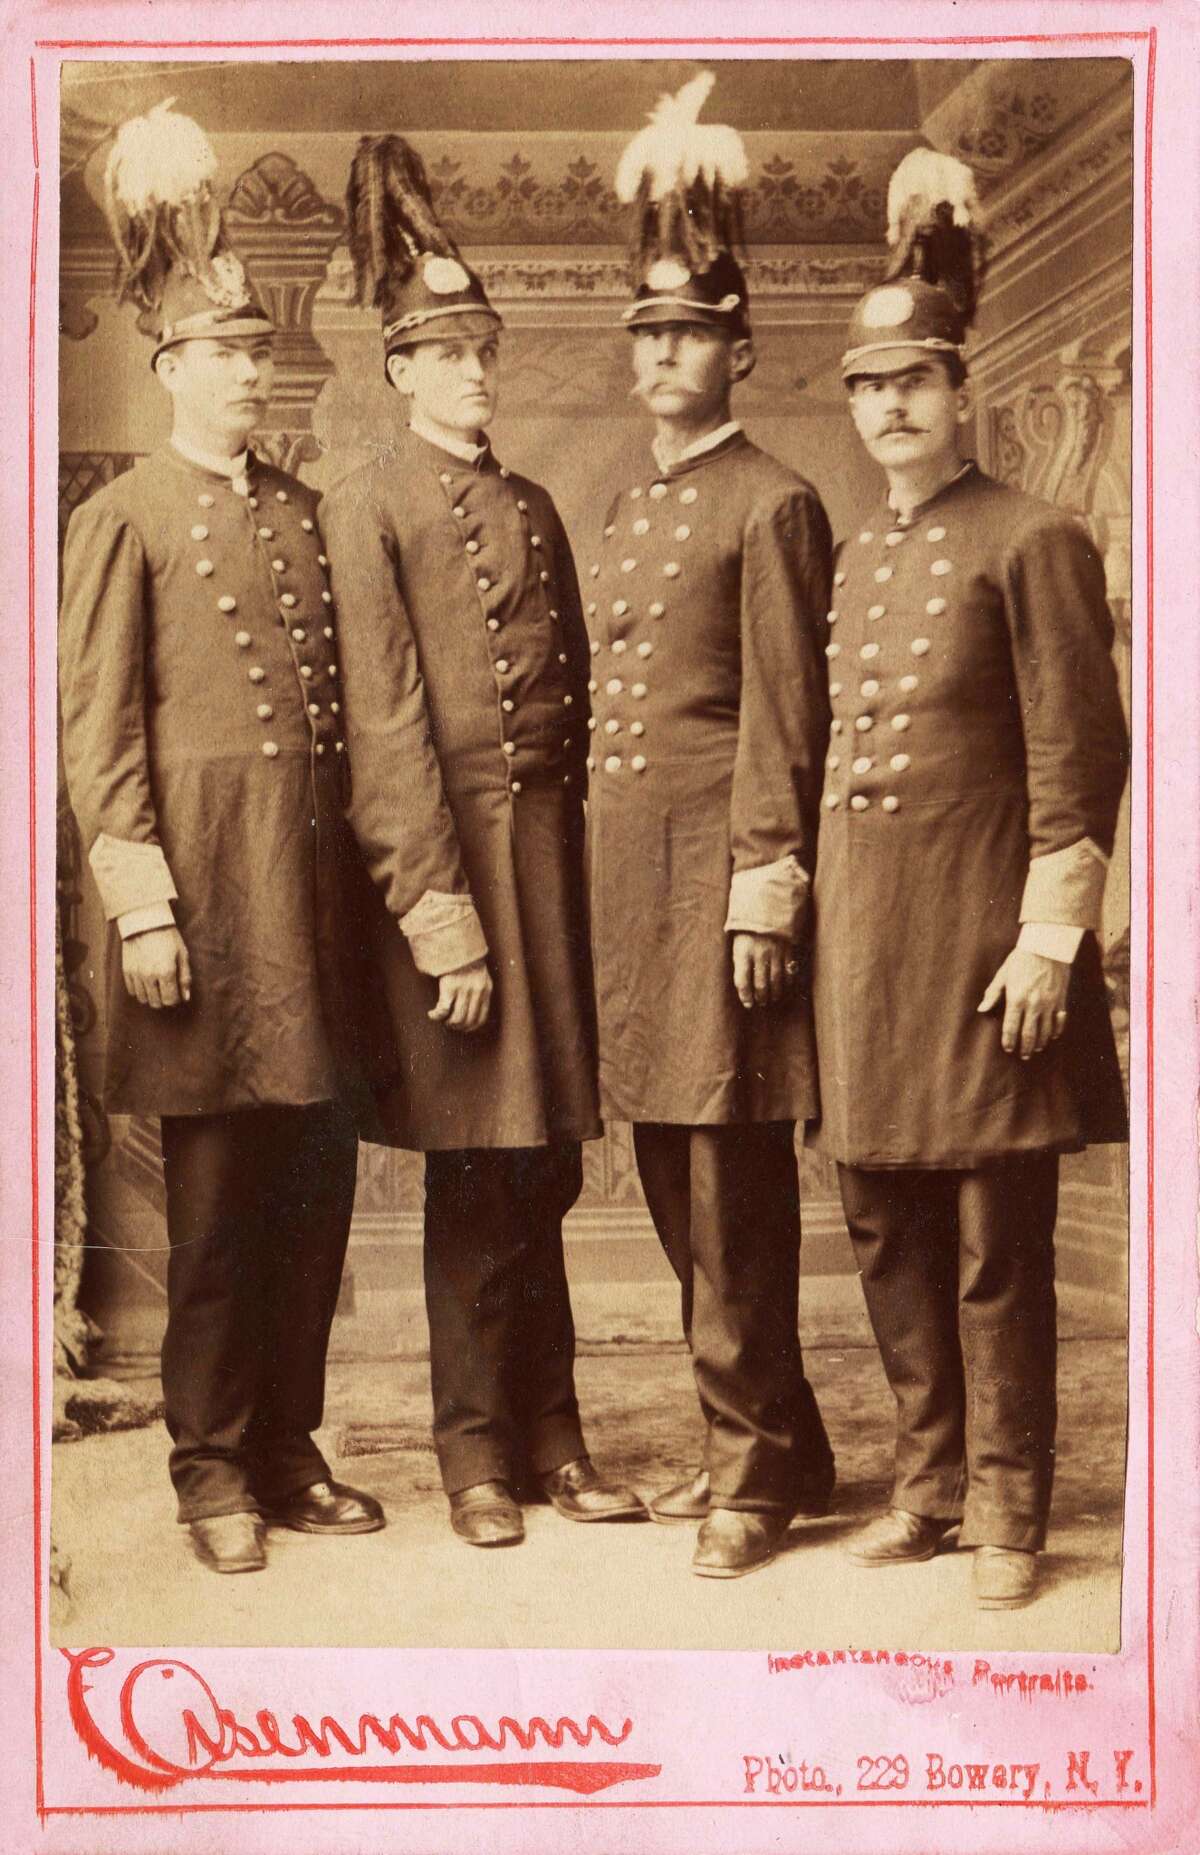 A top Reddit post is revealing history on some of Texas’ tallest, who all happened to be brothers.